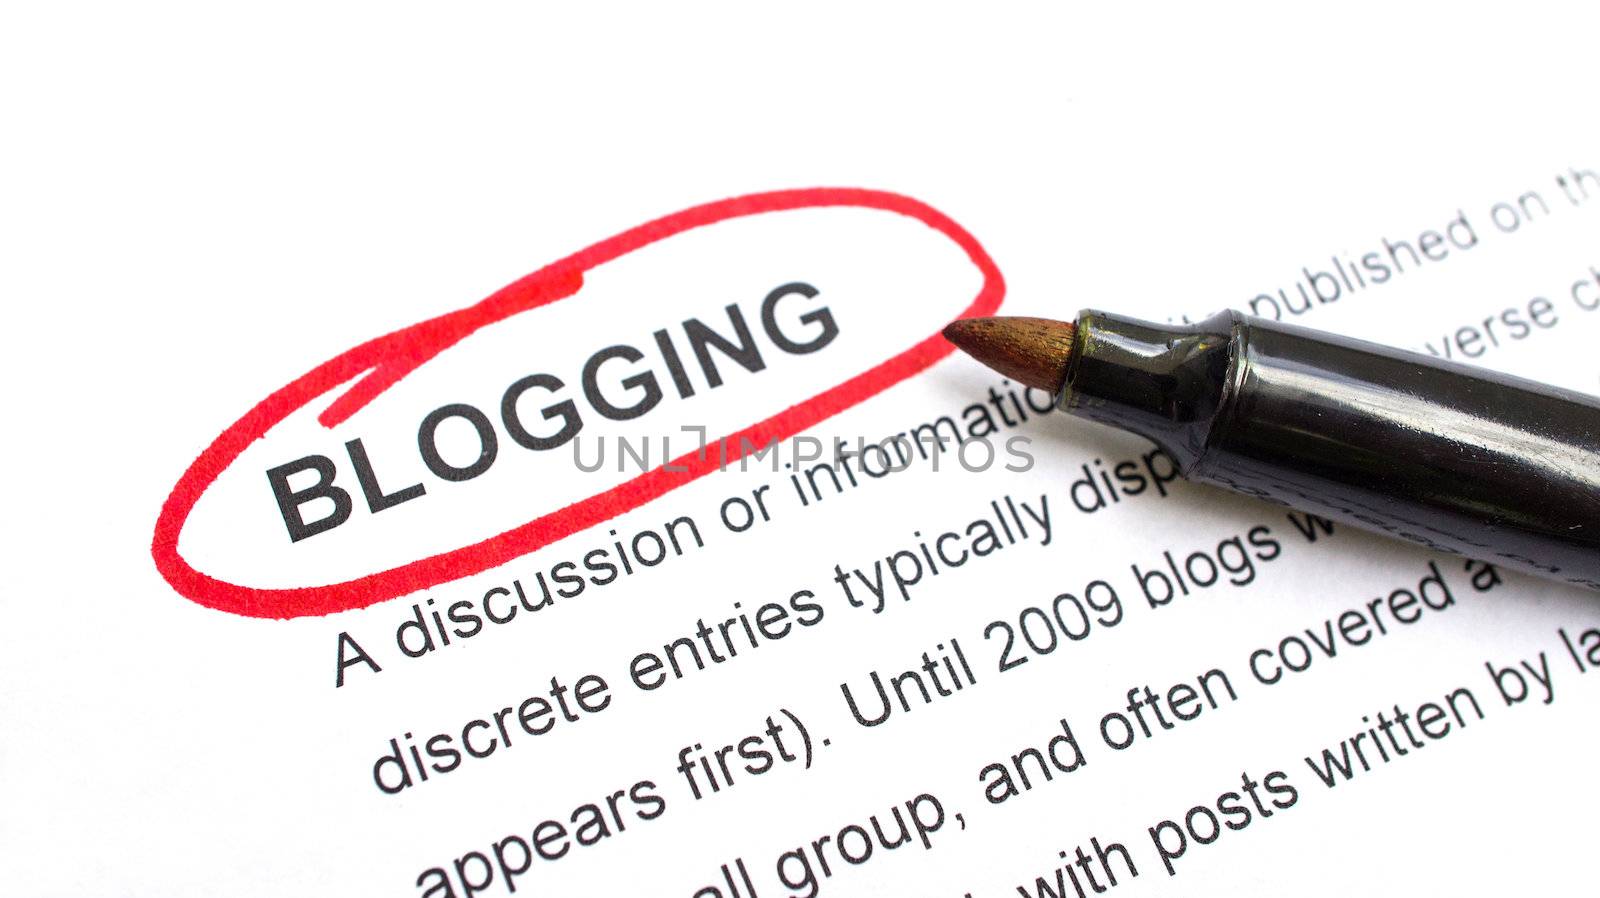 Blogging explanation with heading circled in red.